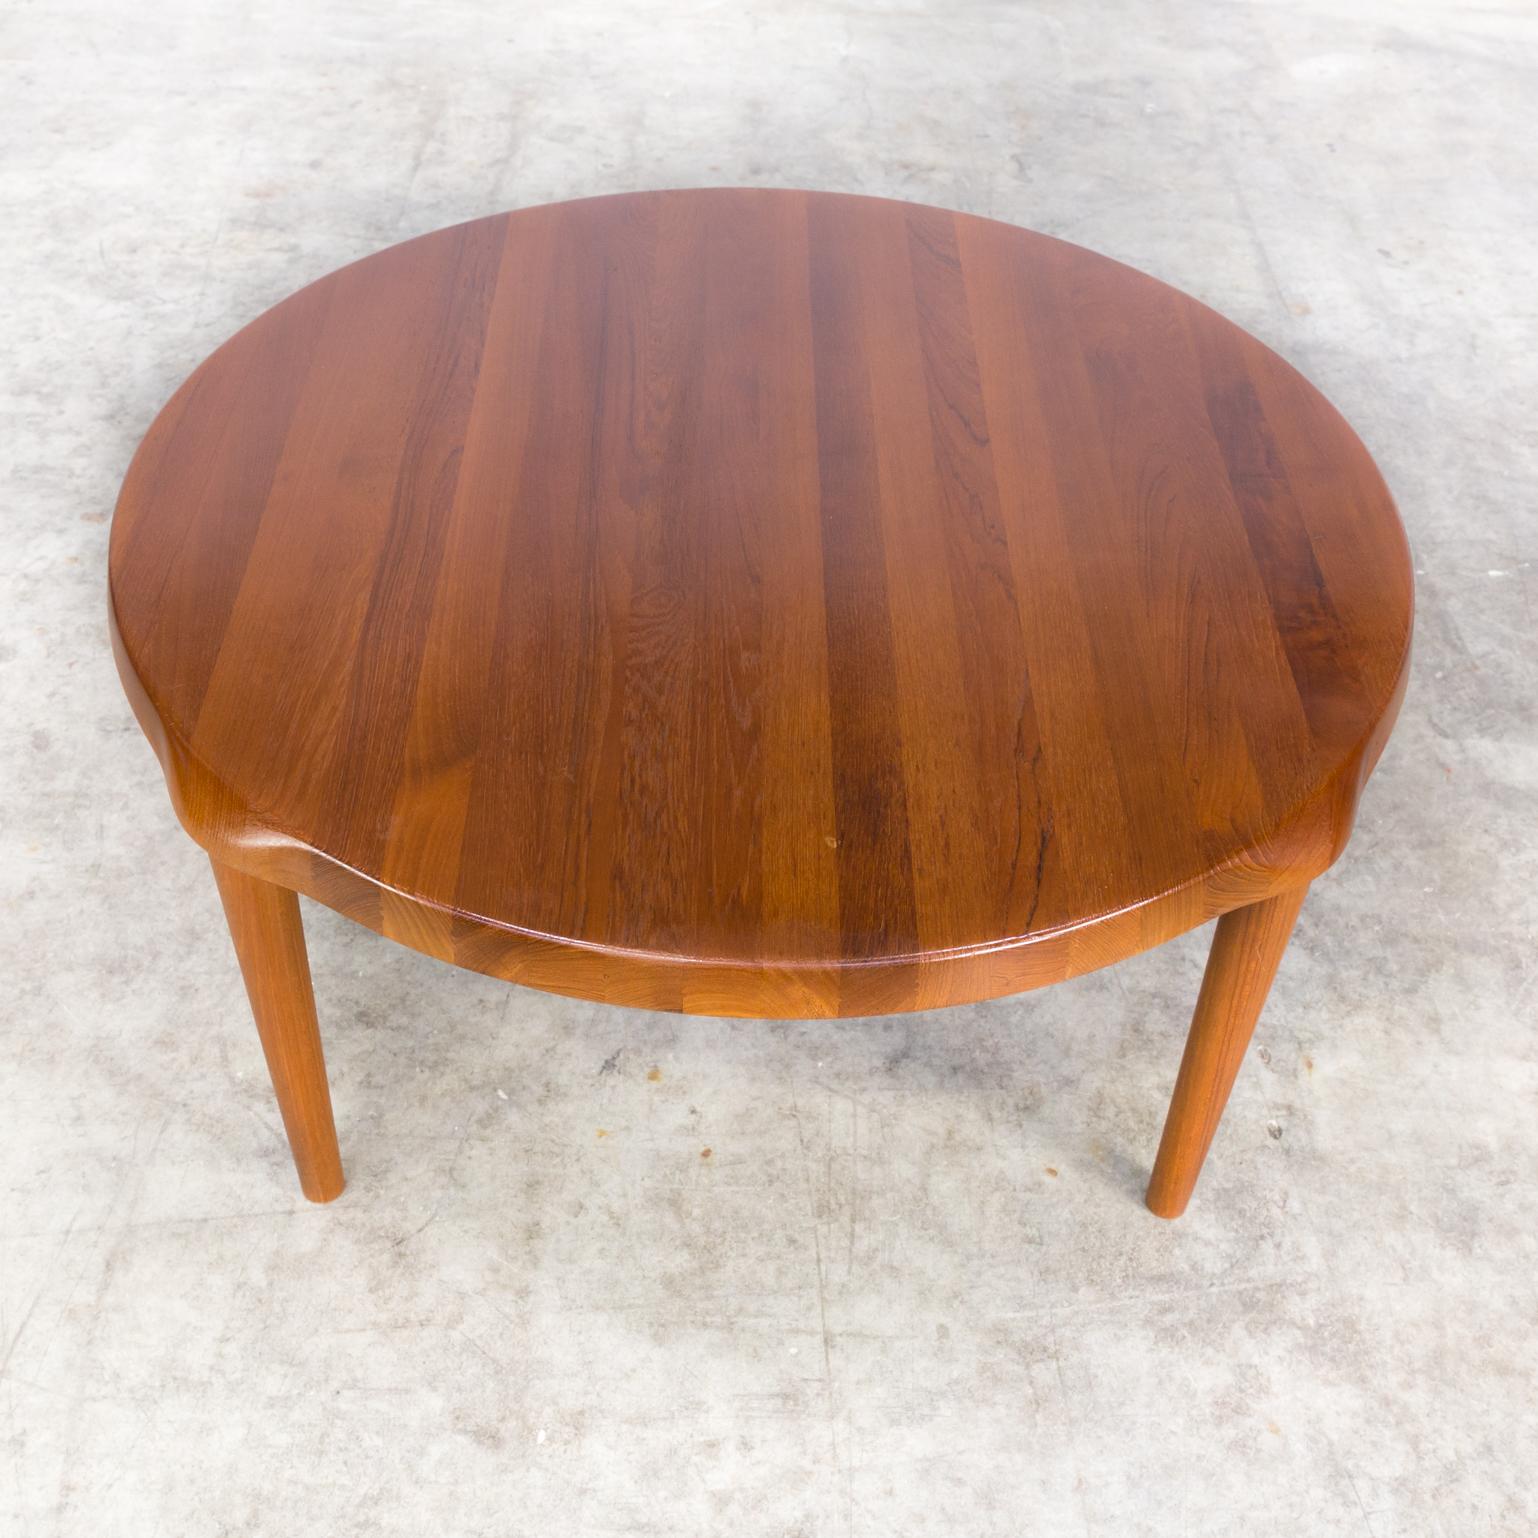 1960s John Boné Teak Round Coffee Table for Mikael Laursen In Good Condition For Sale In Amstelveen, Noord